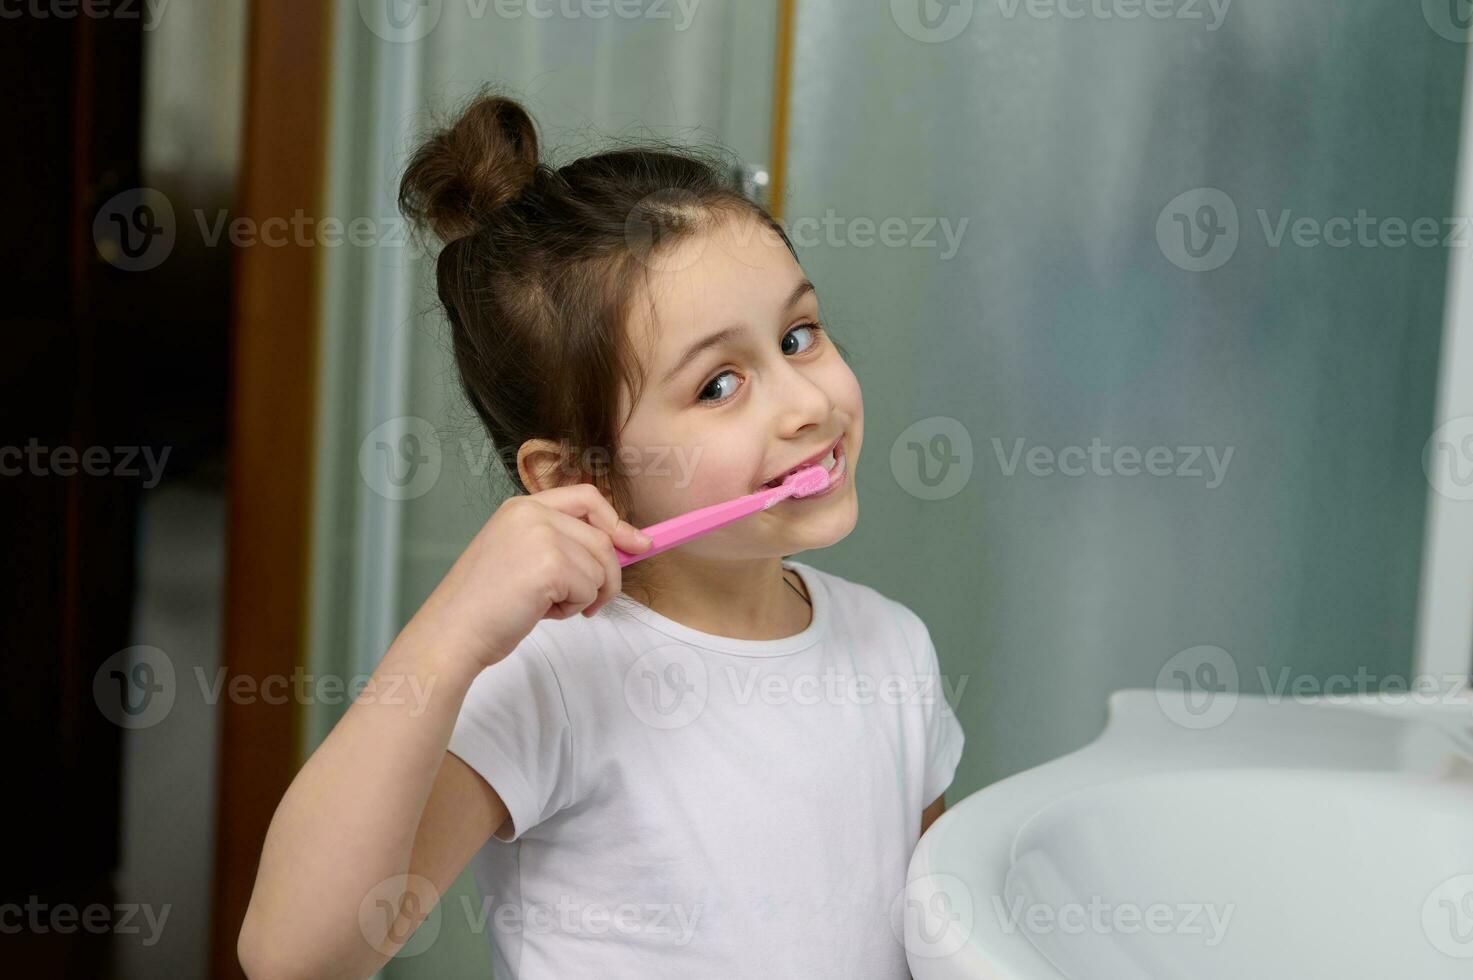 Dental care and oral hygiene for healthy white baby teeth. Close-up smiling child girl brushing teeth looking at camera. photo